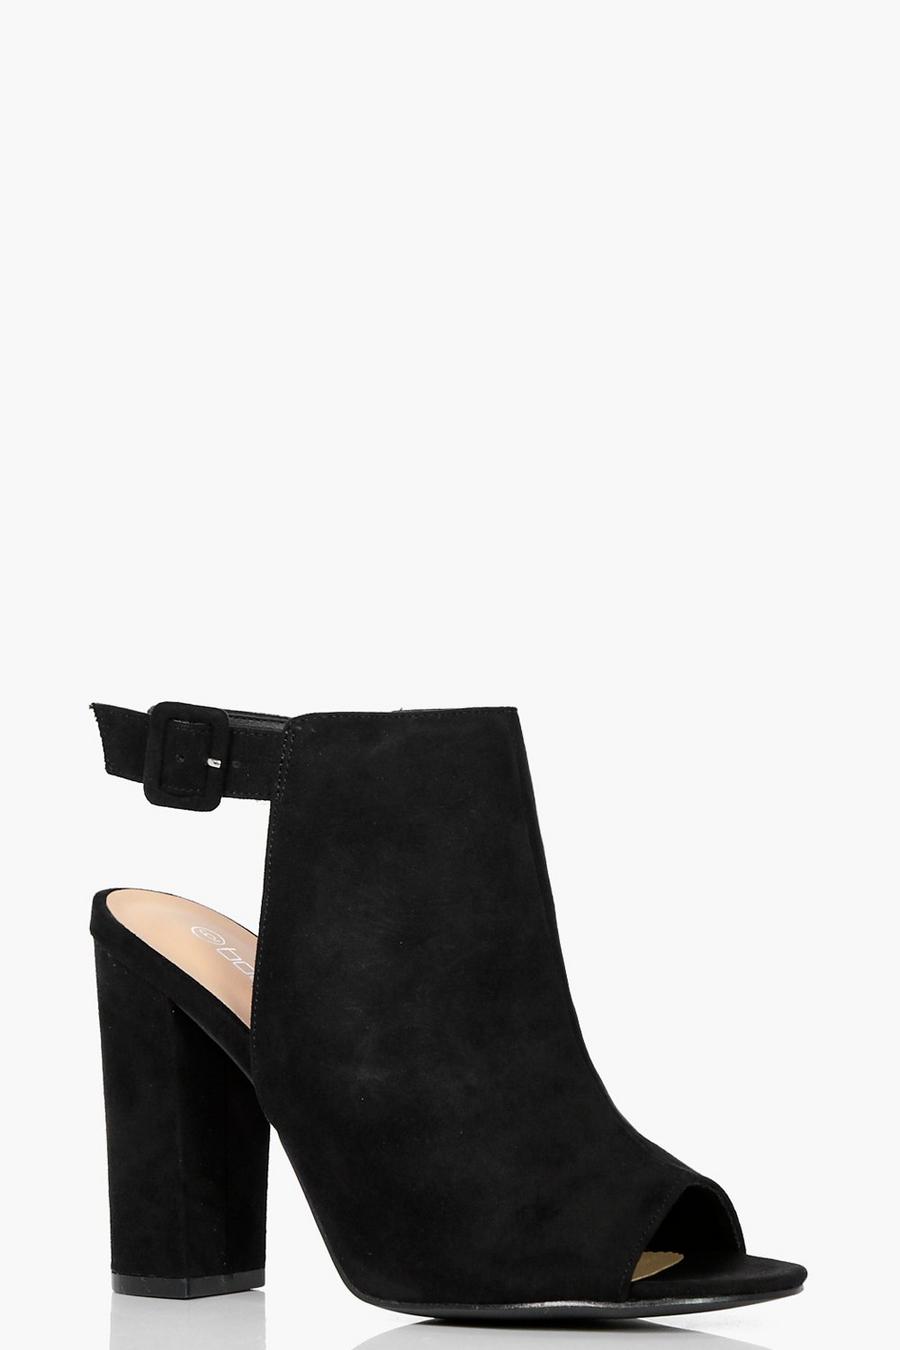 Chaussures bottes pieds larges peep toe, Noir image number 1